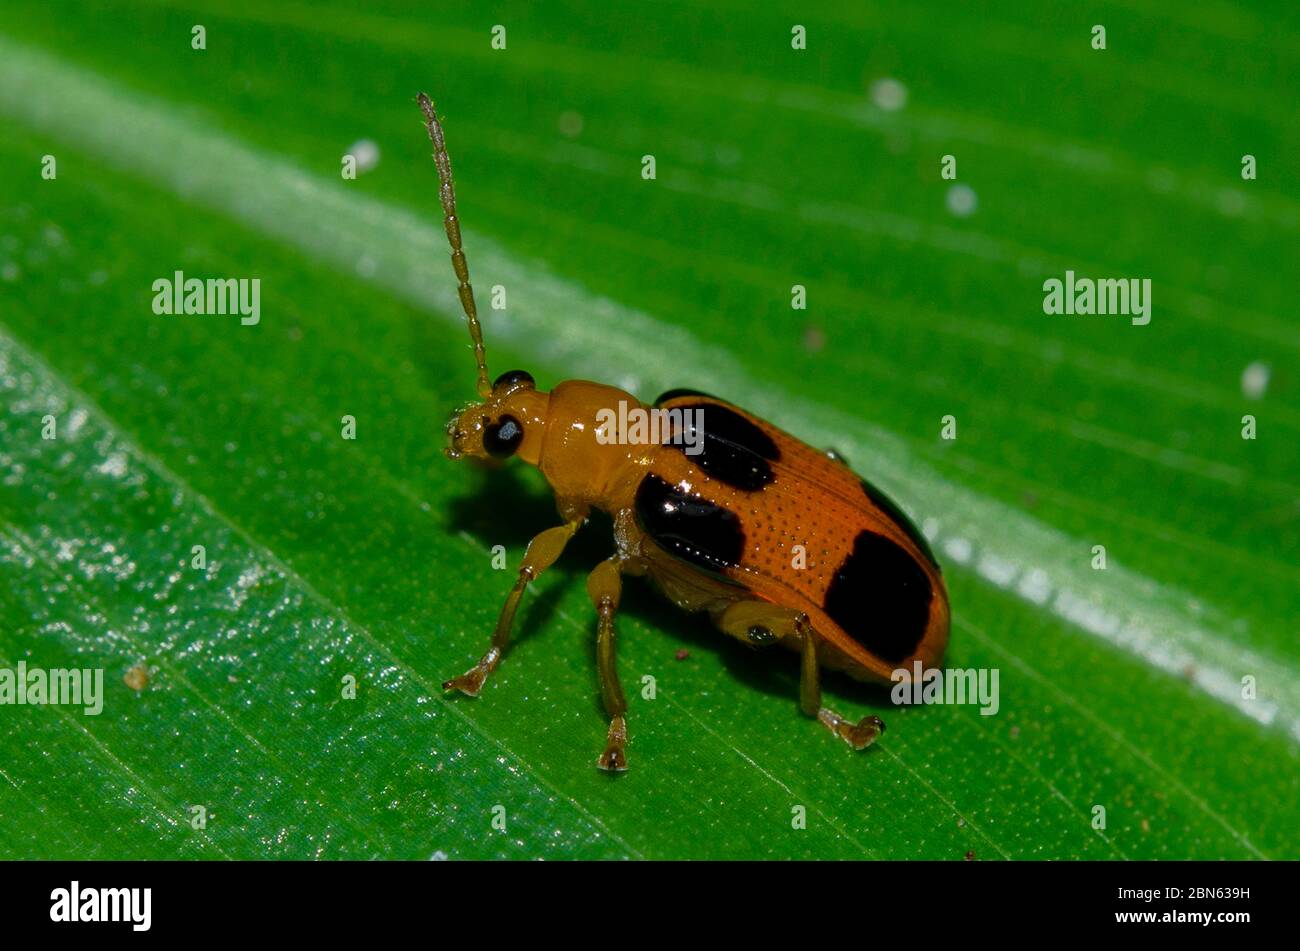 Leaf Beetle, Podontia affinis, on leaf, Klungkung, Bali, Indonesia Stock Photo